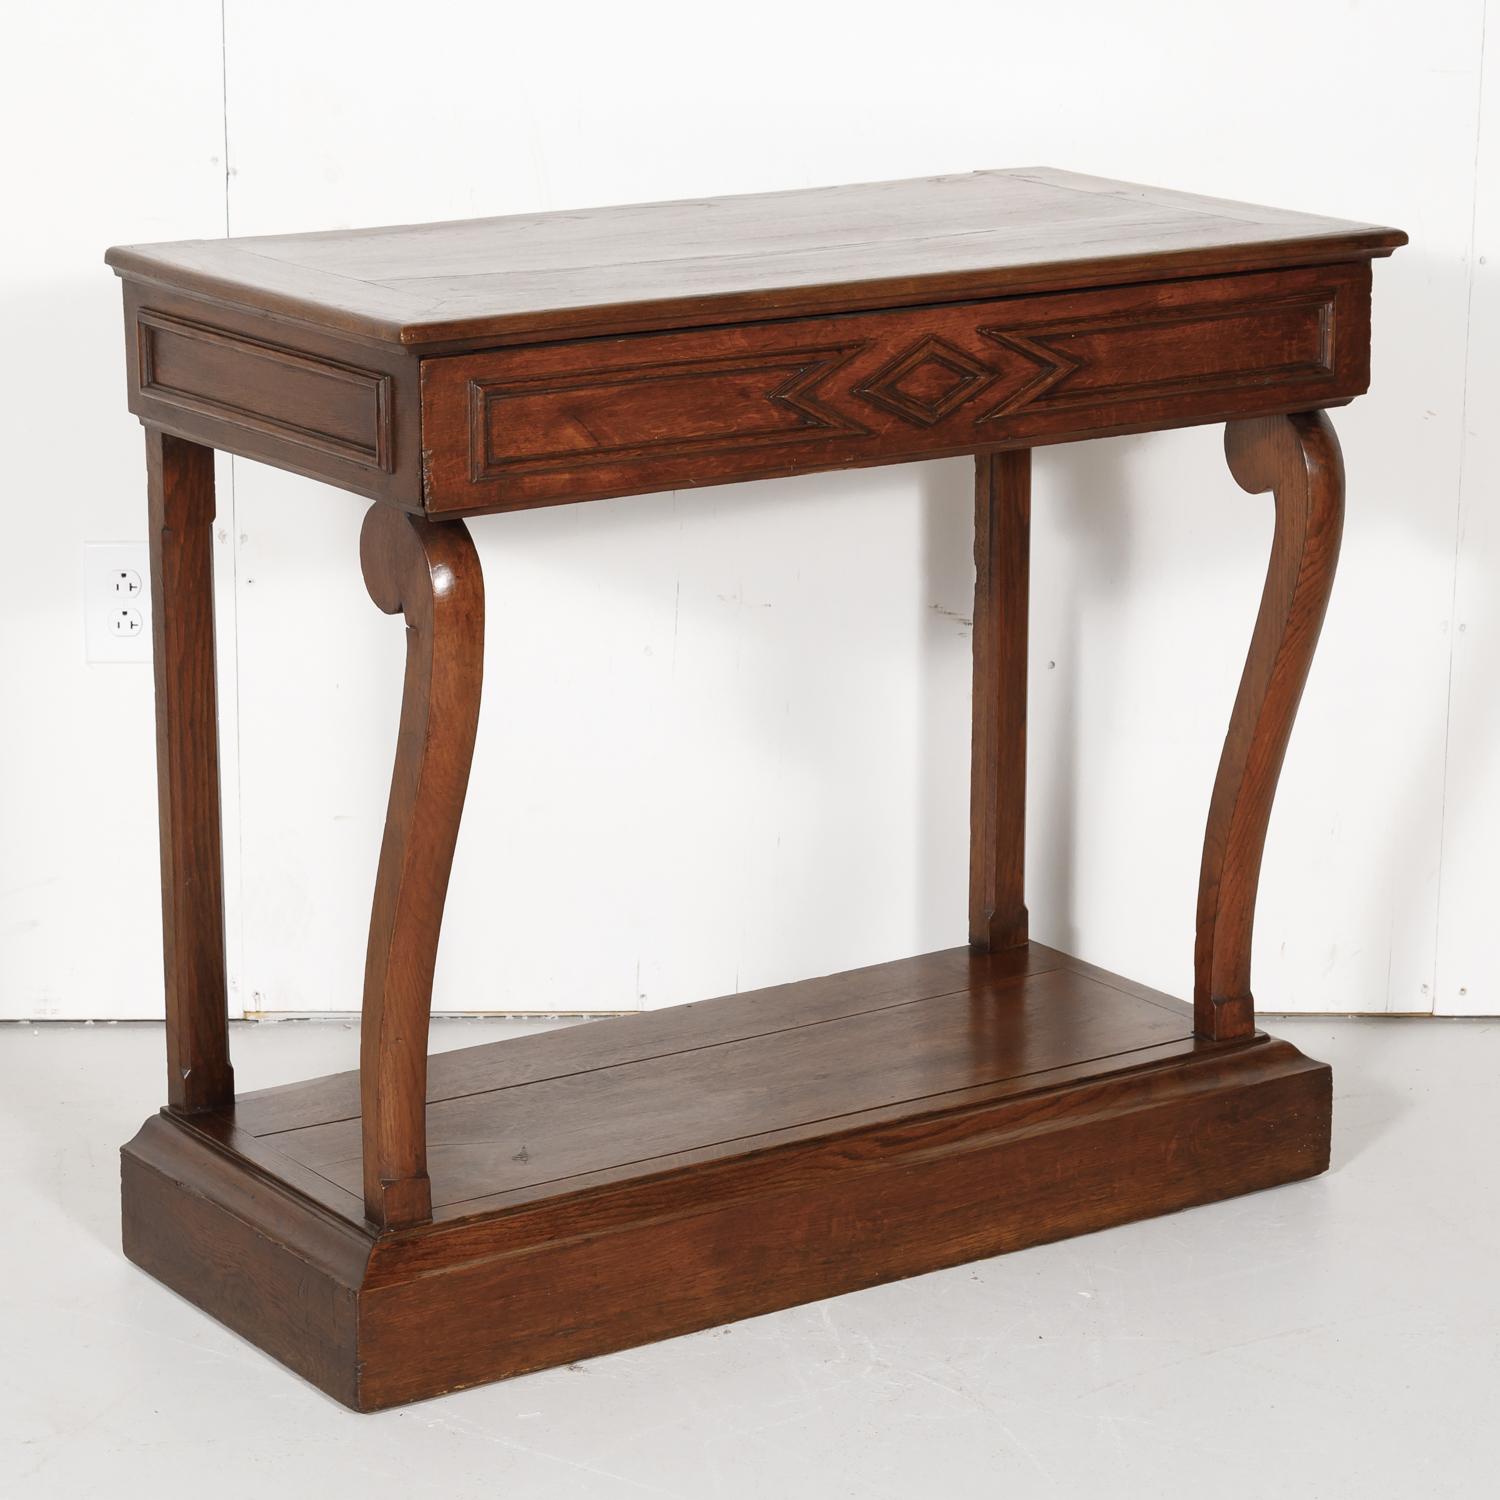 French Art Deco period console handcrafted in solid oak, having a rectangular top sitting above a single carved drawer flanked by scrolling columnar supports terminating in small hoof feet, all raised on a conforming plinth. The graceful curves and